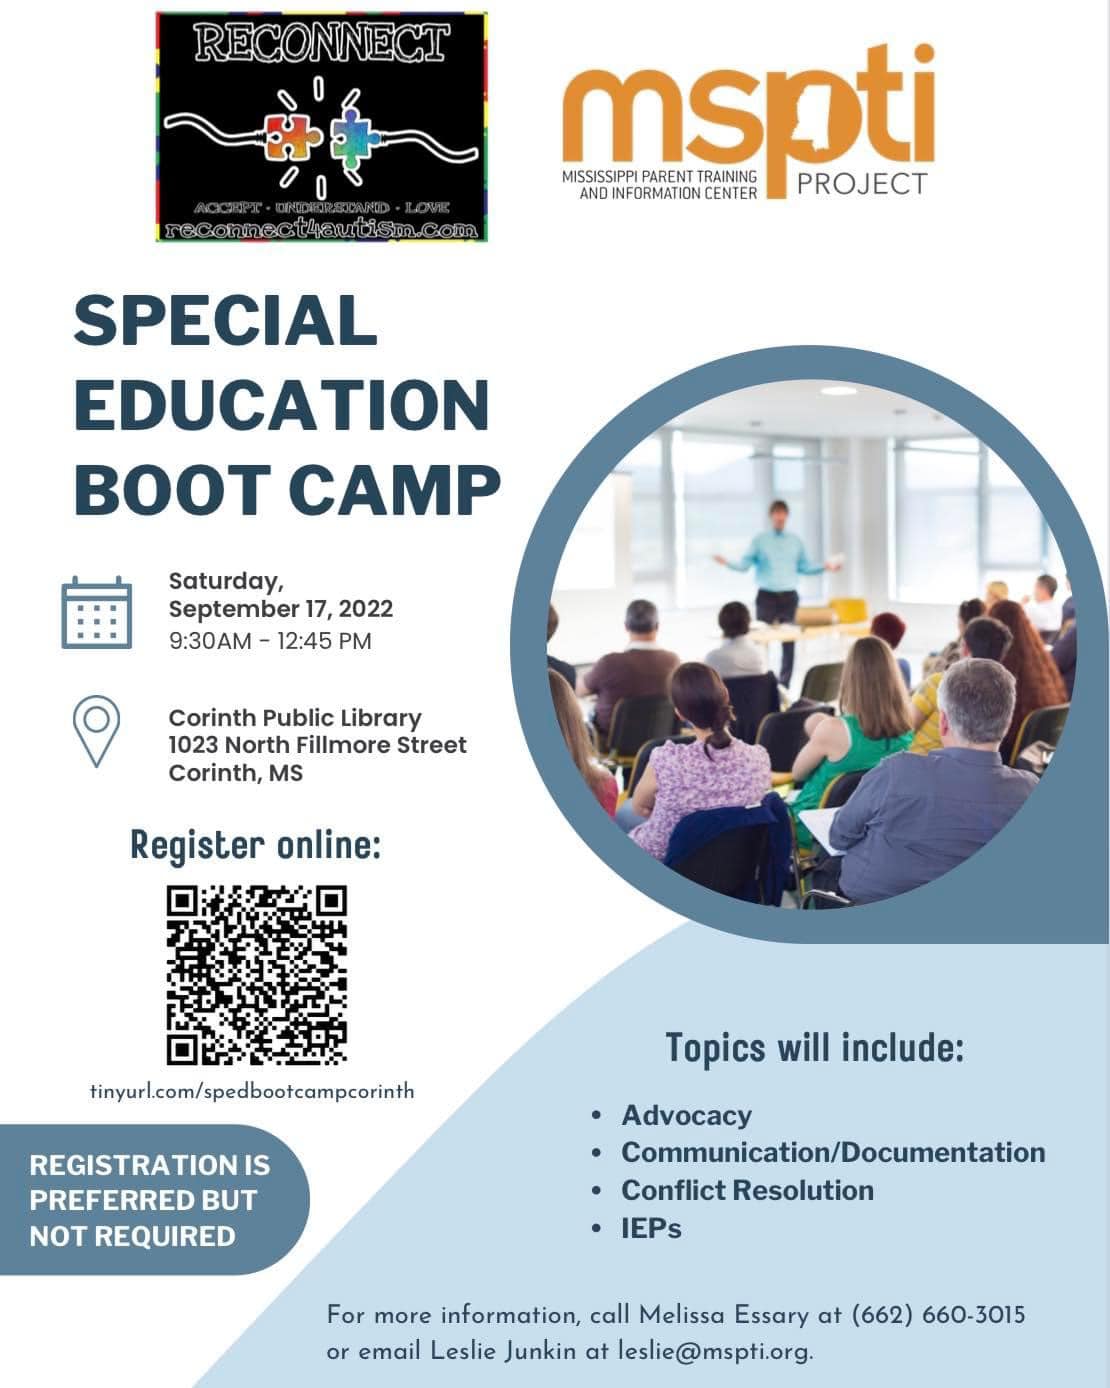 Special Education Boot Camp Flyer